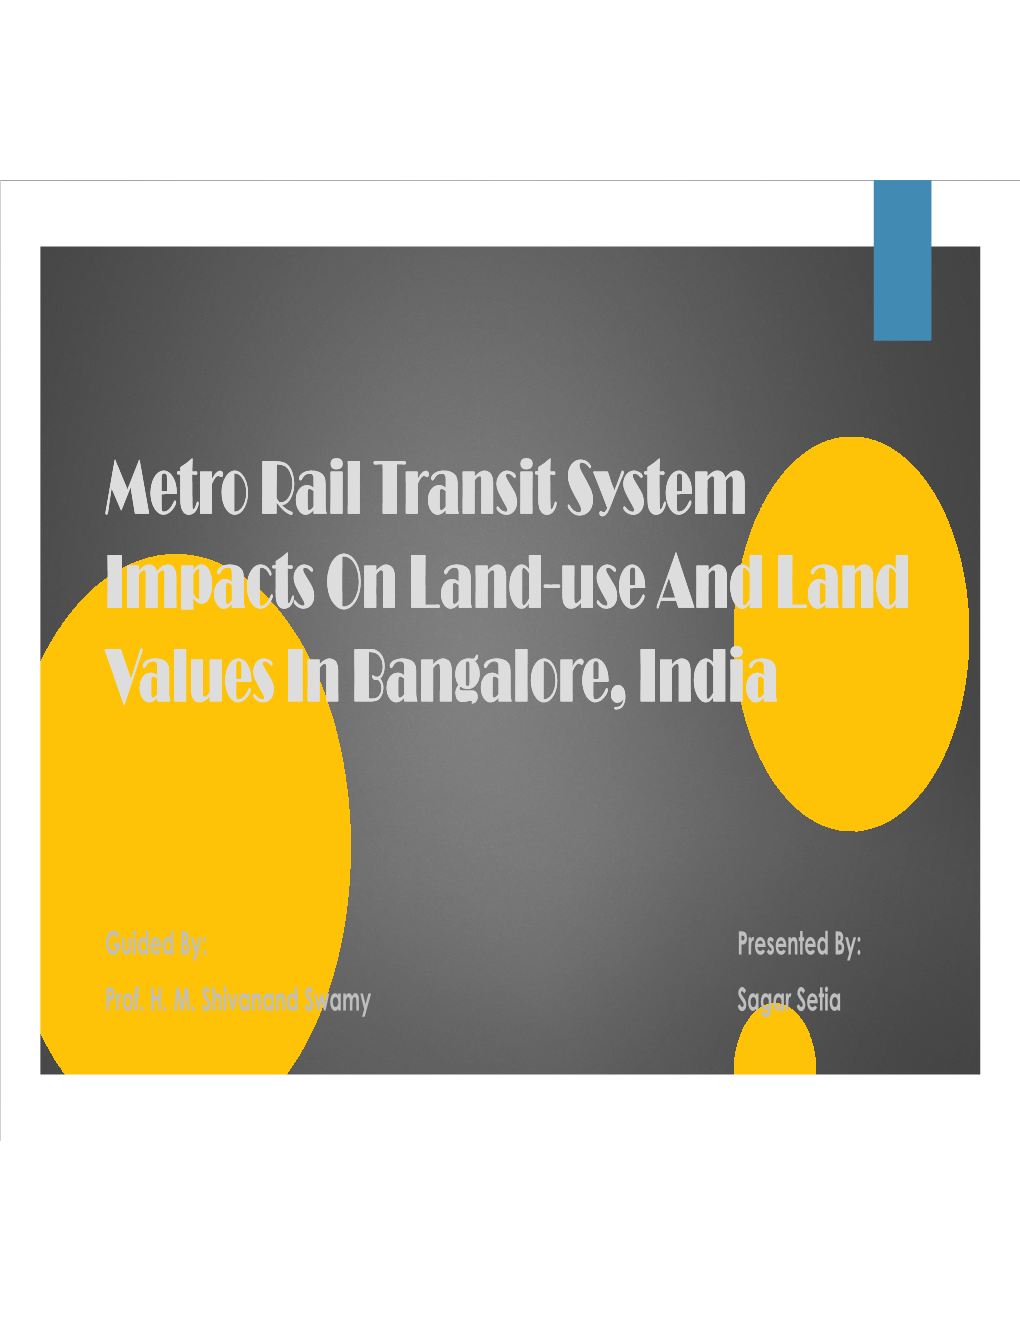 Metro Rail Transit System Impacts on Land Impacts on Land-Use And